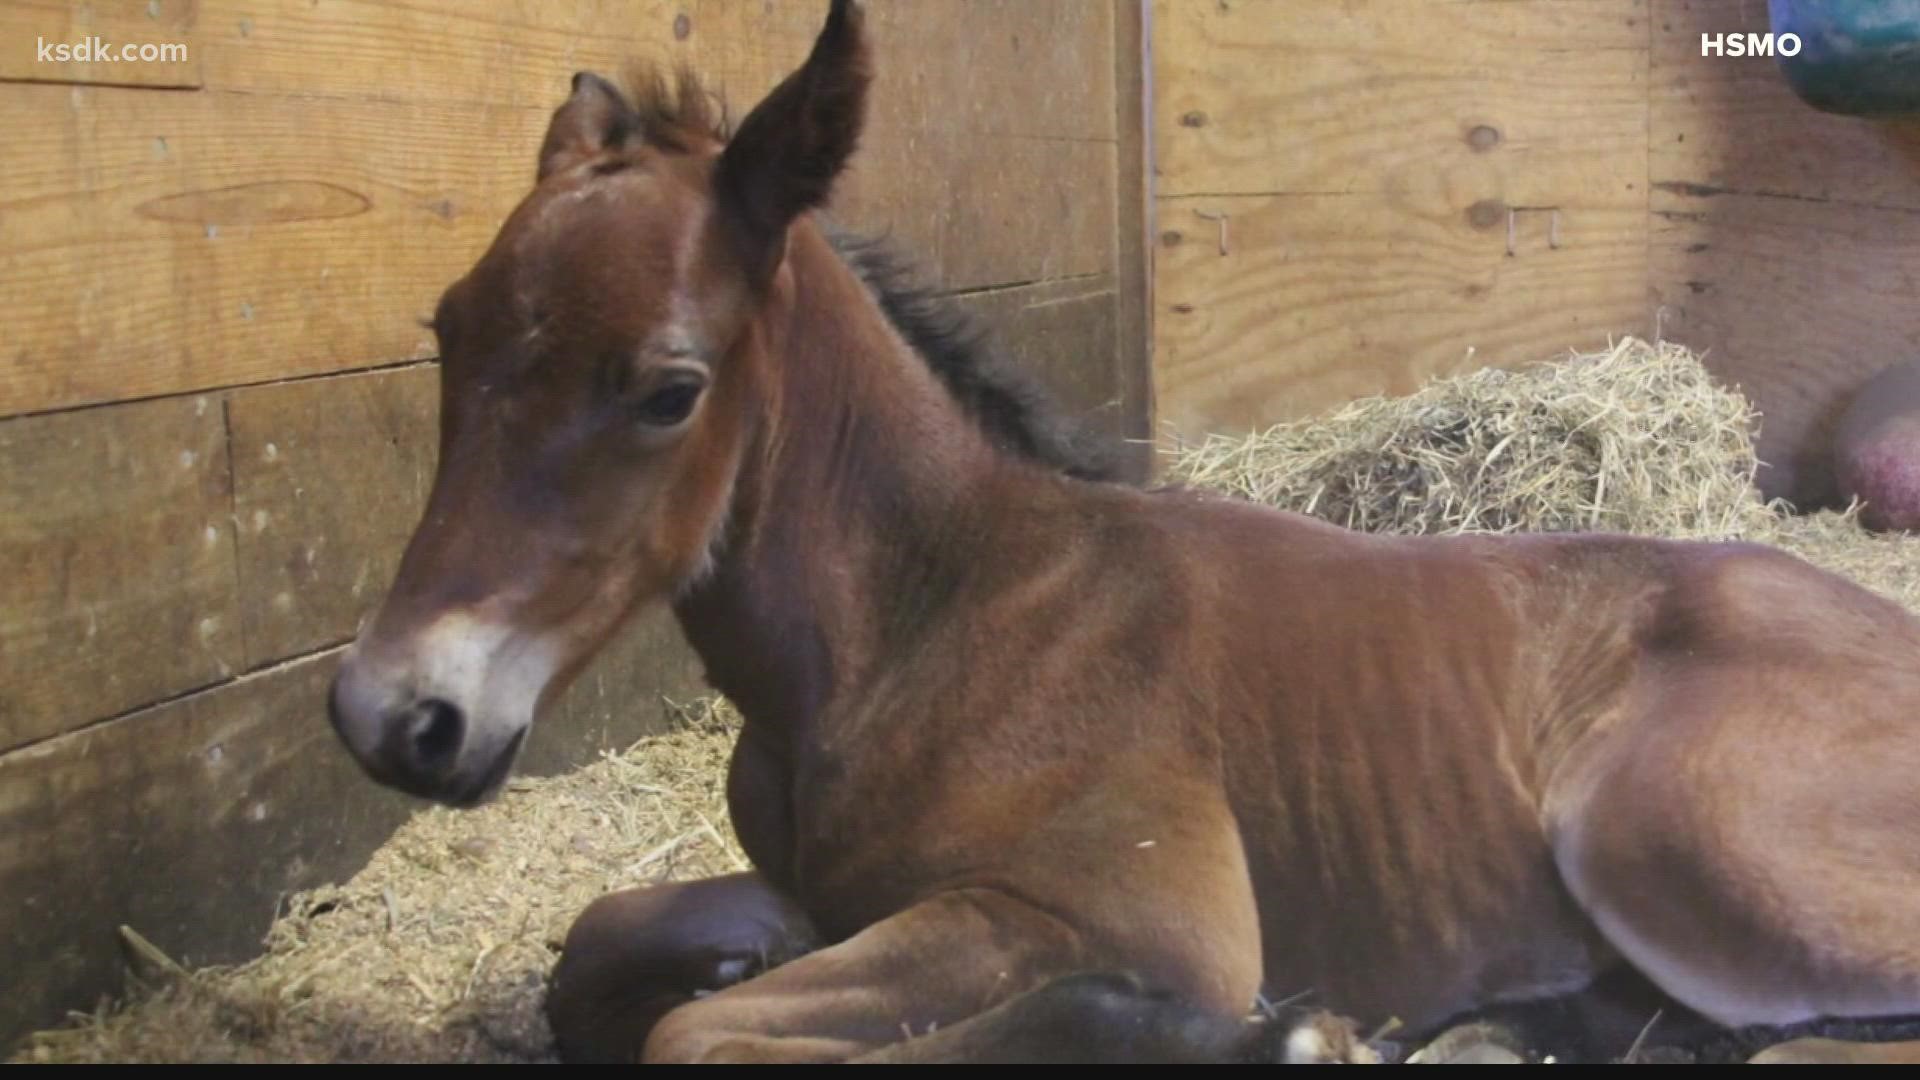 Vote to name the colt at Longmeadow Rescue Ranch 